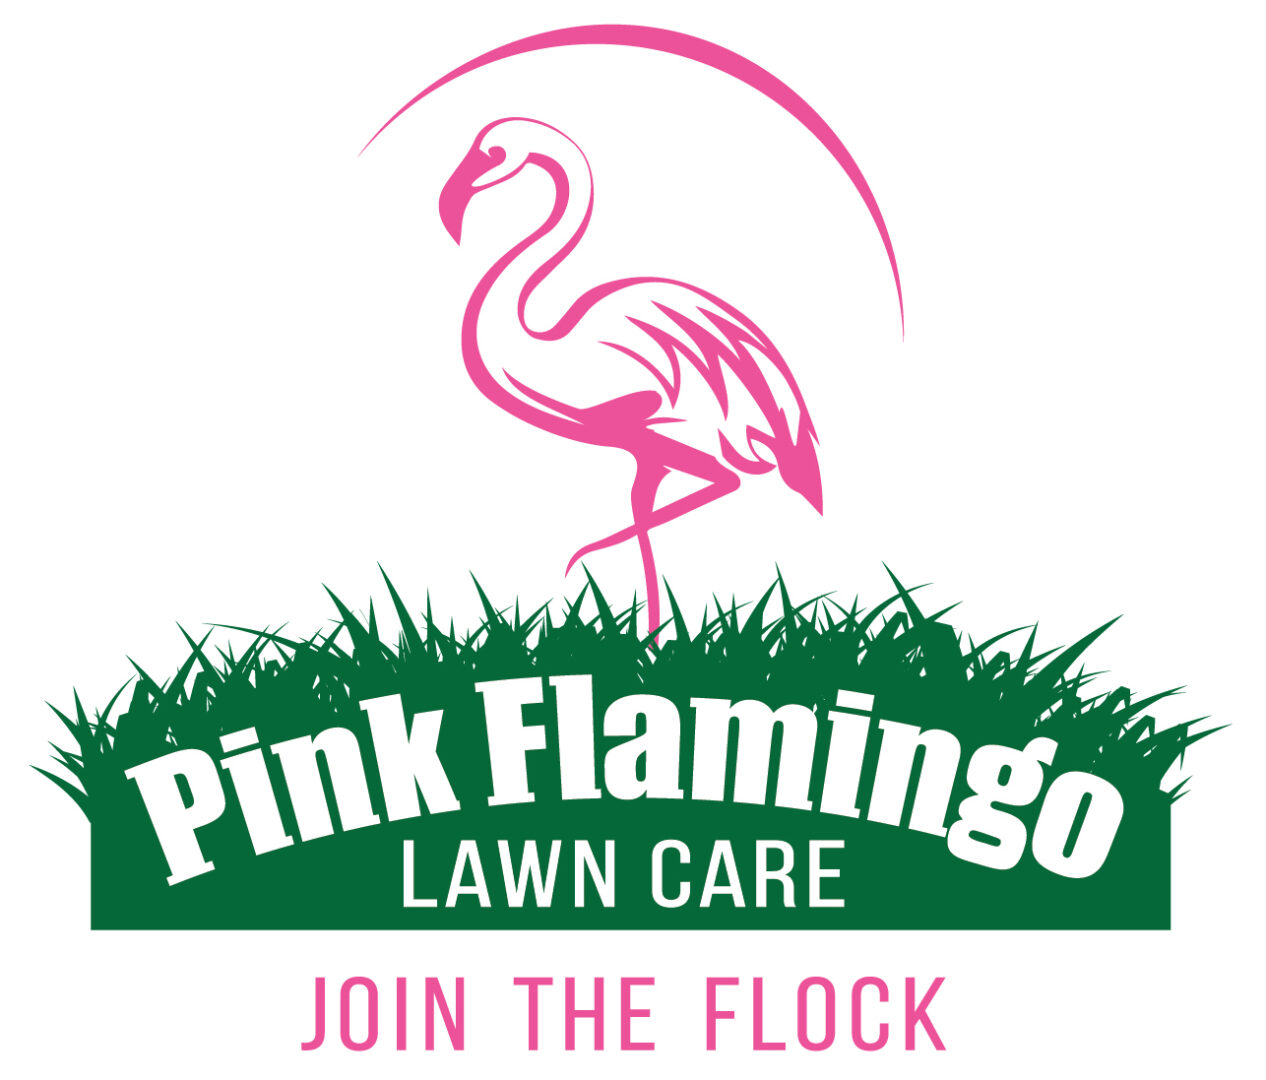 A pink flamingo lawn care logo with grass and a bird.